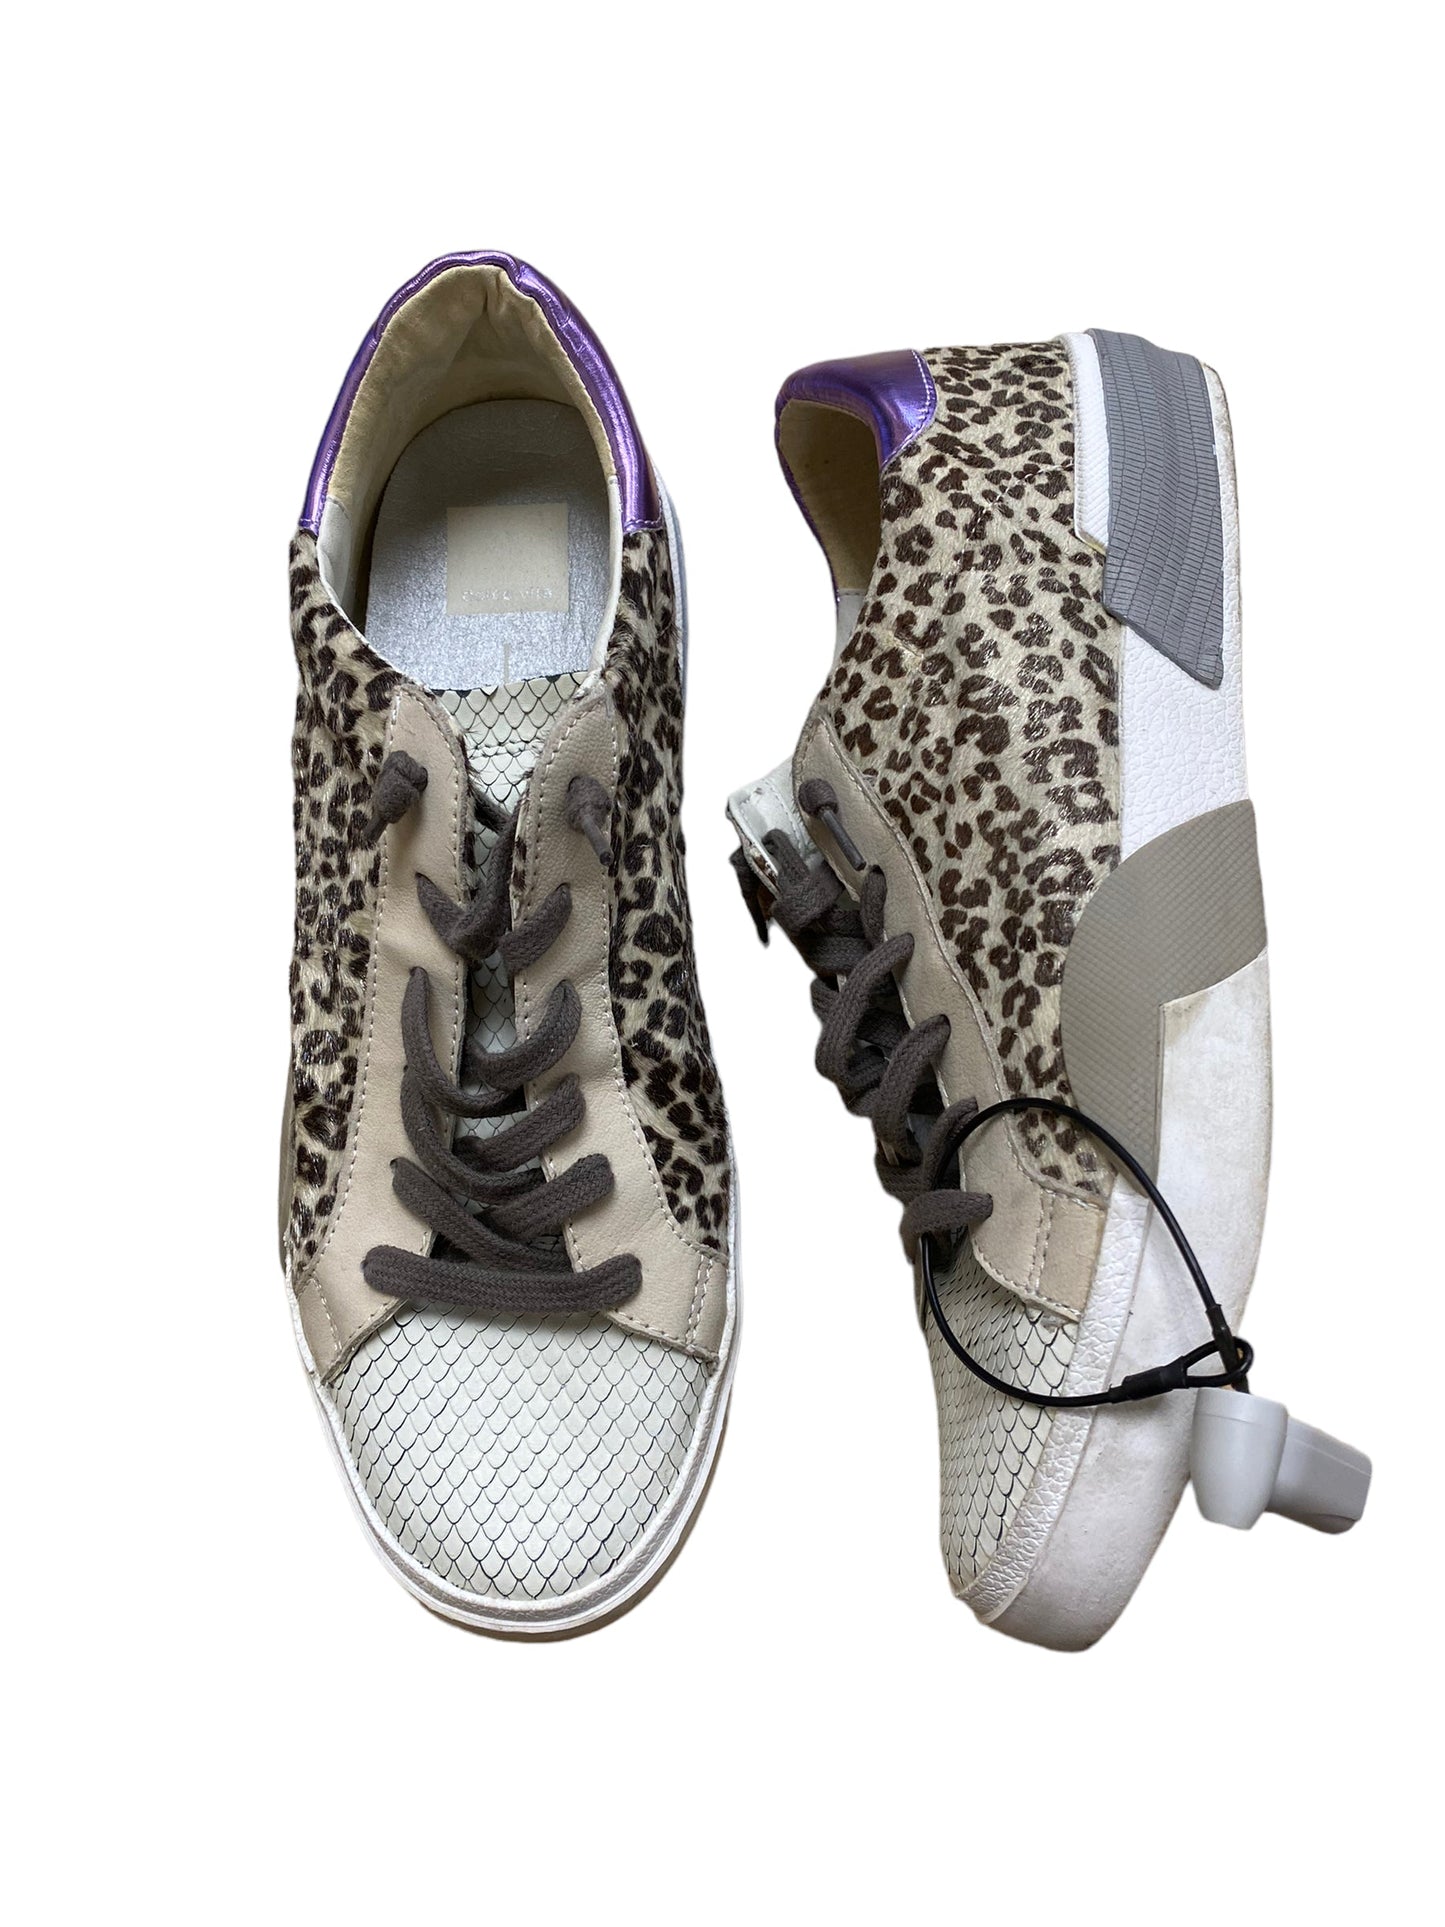 Shoes Sneakers By Dolce Vita  Size: 9.5